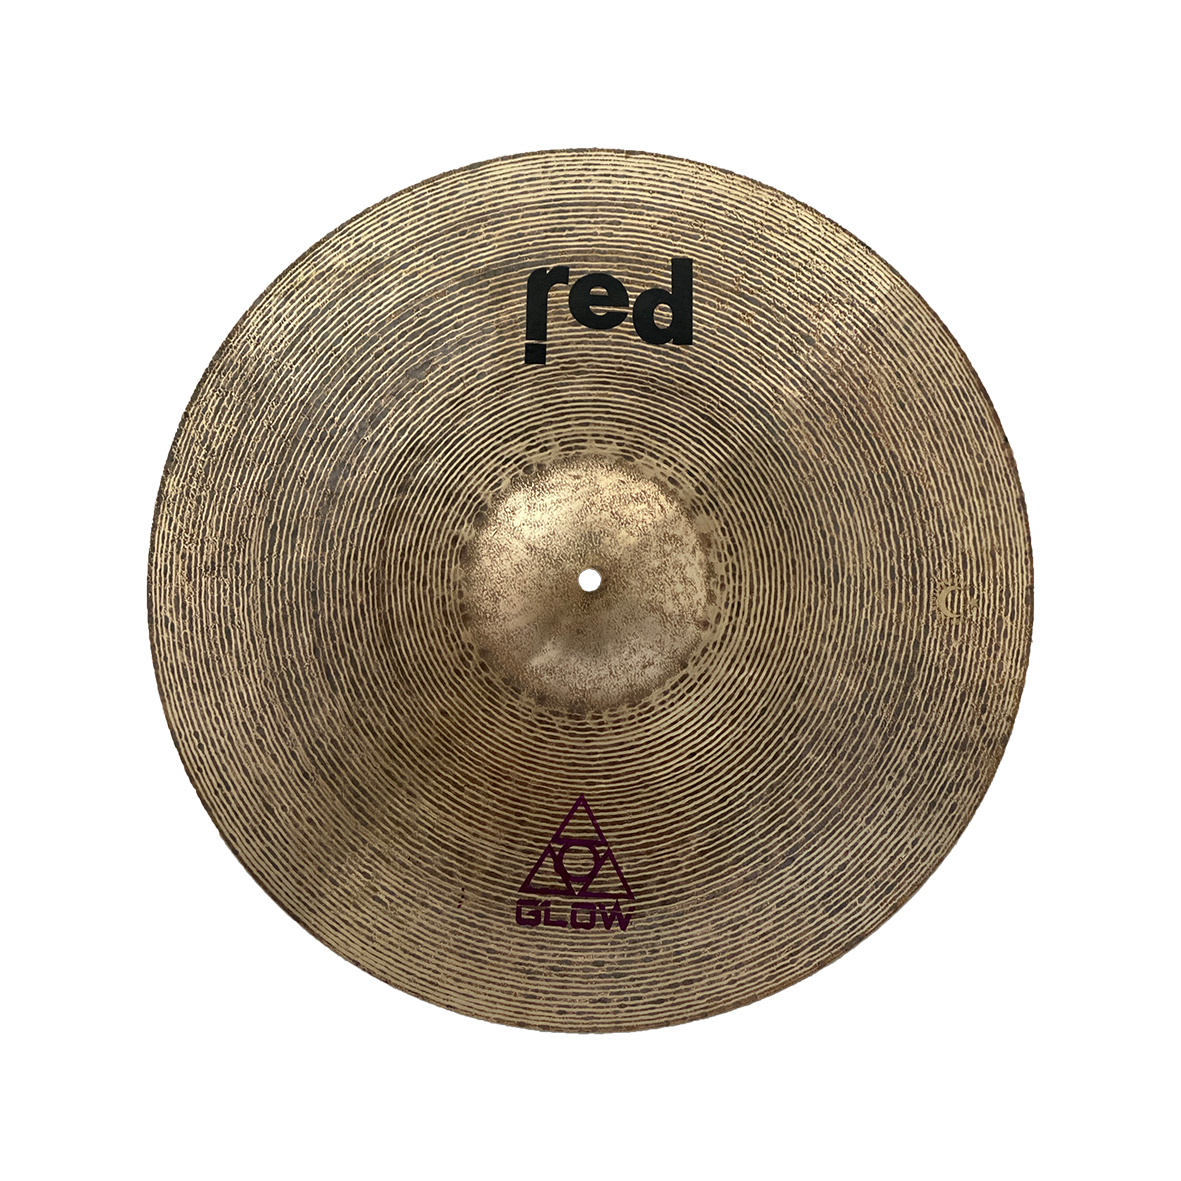 Red Cymbals Glow Series Ride Cymbal